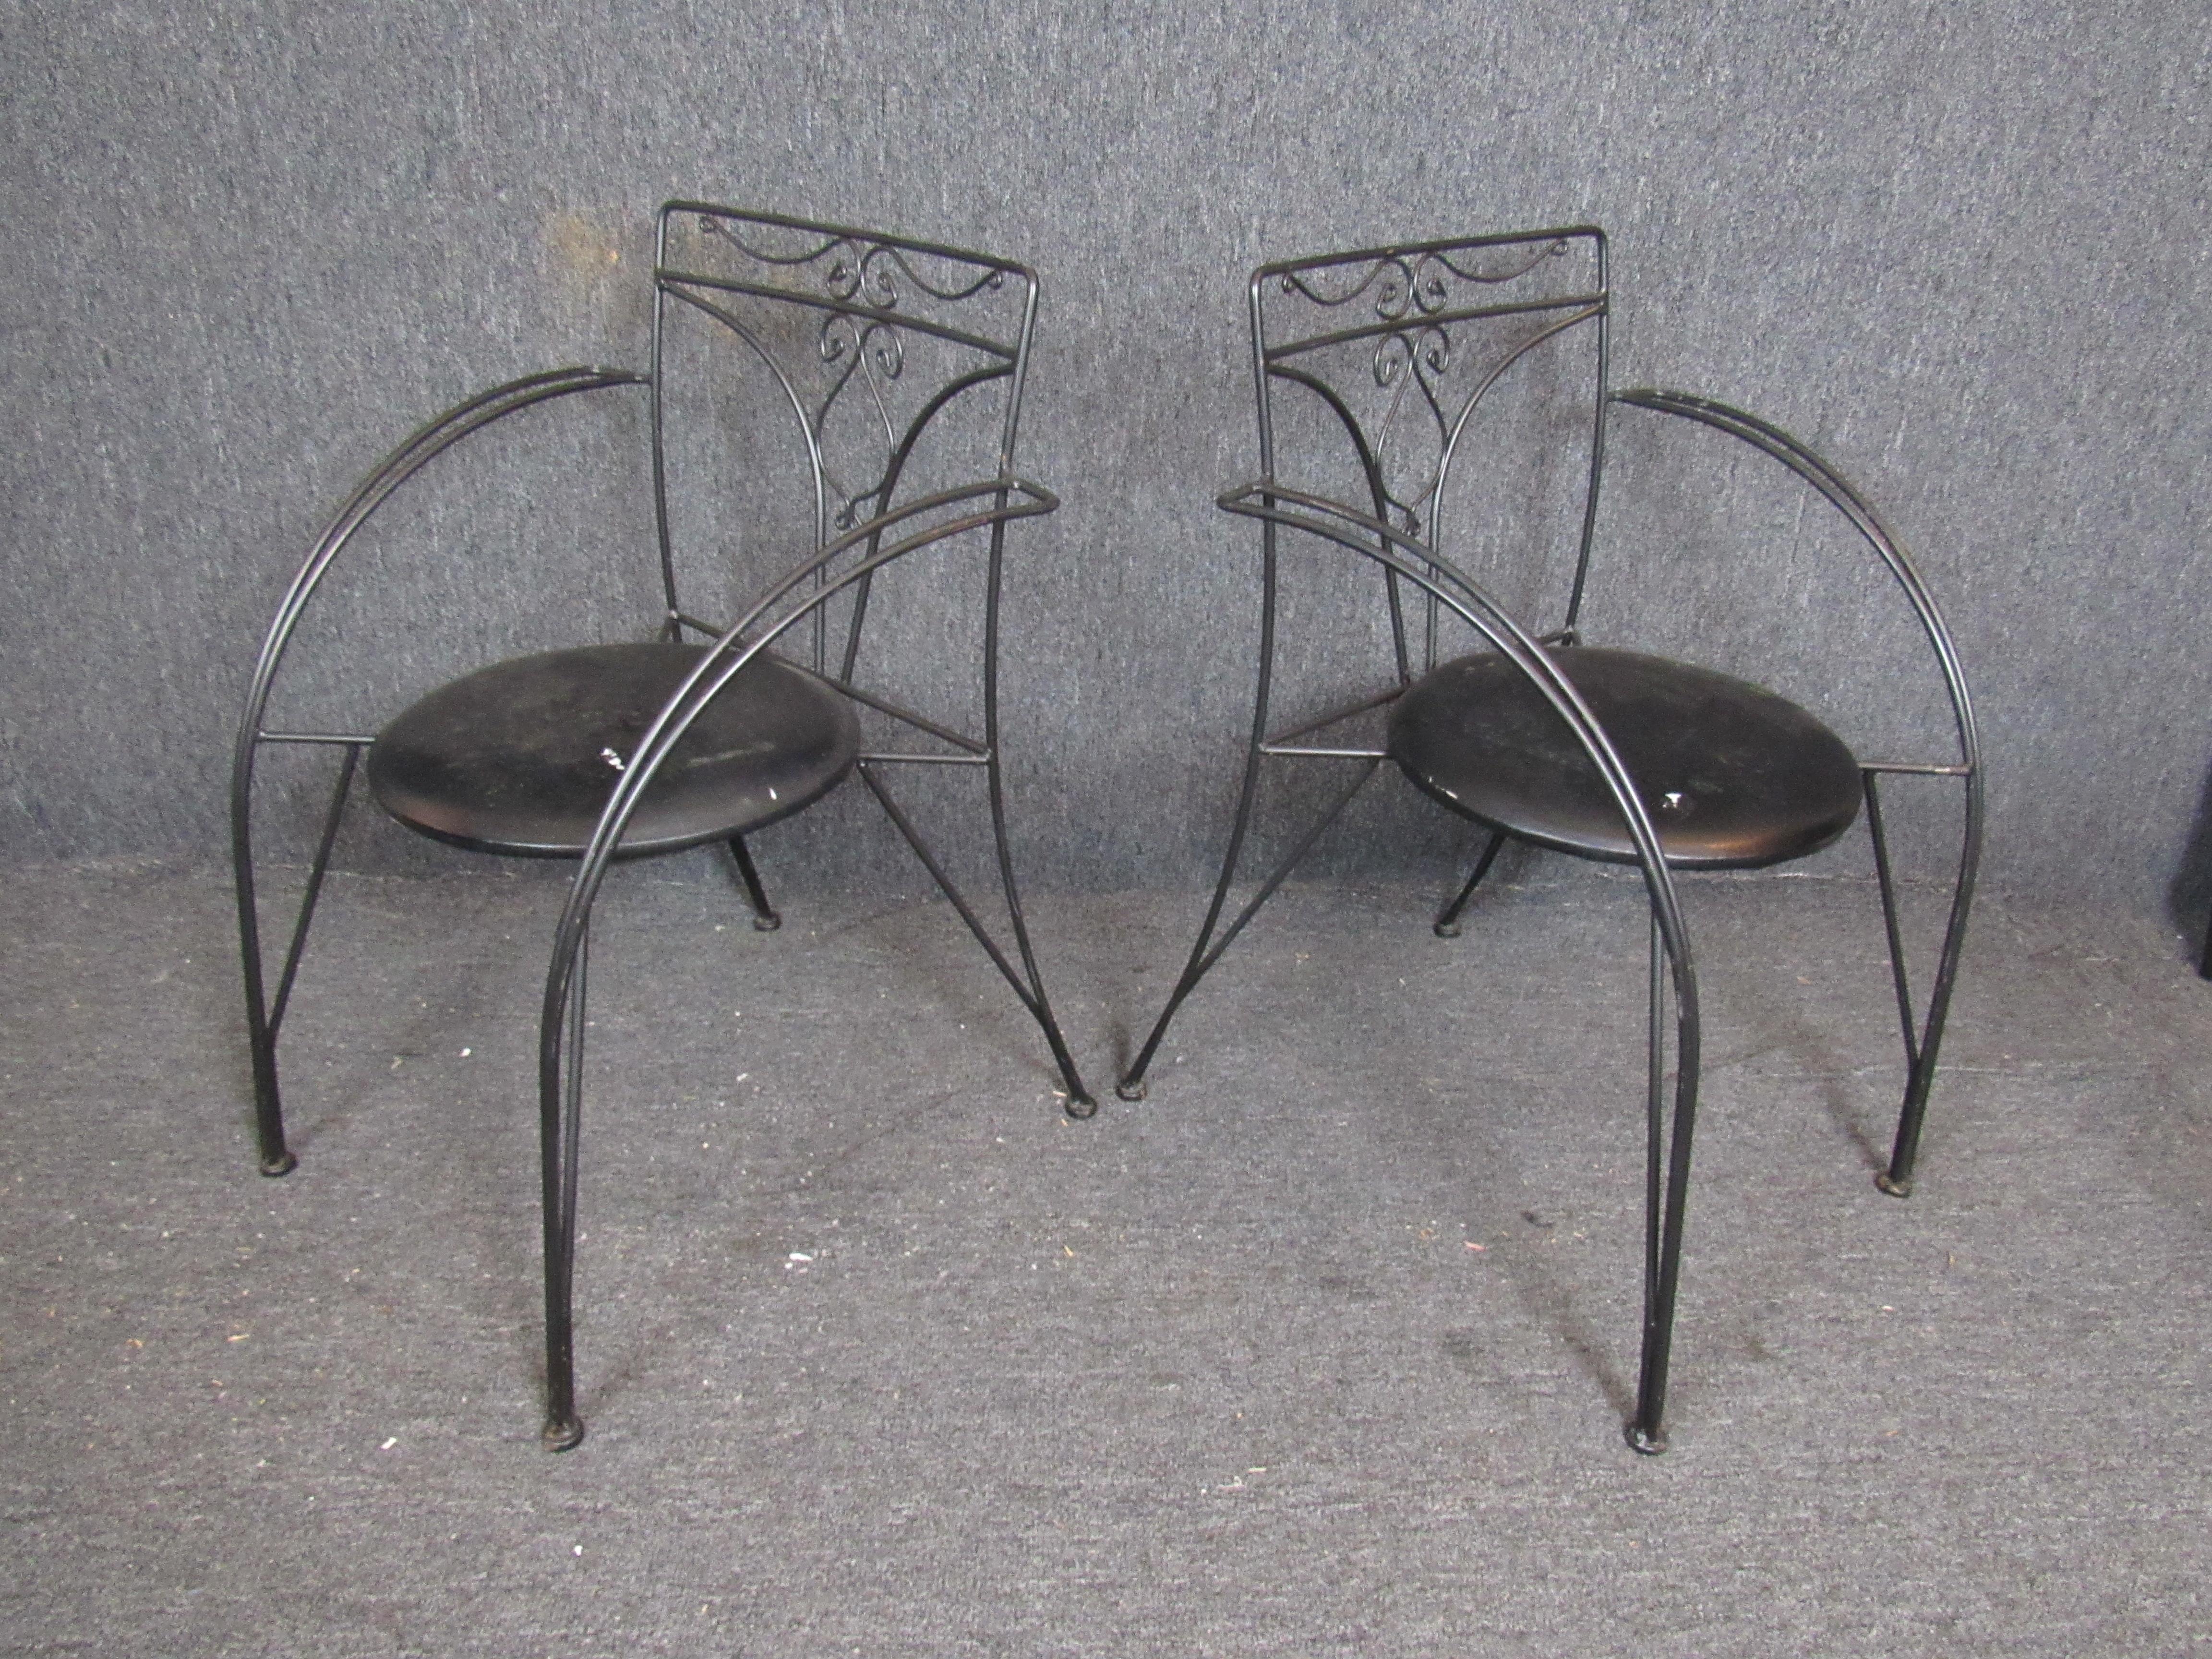 Stylish garden chairs with sweeping arms and decorative backs. Vinyl seats are easily recovered.
Please confirm location NY or NJ.